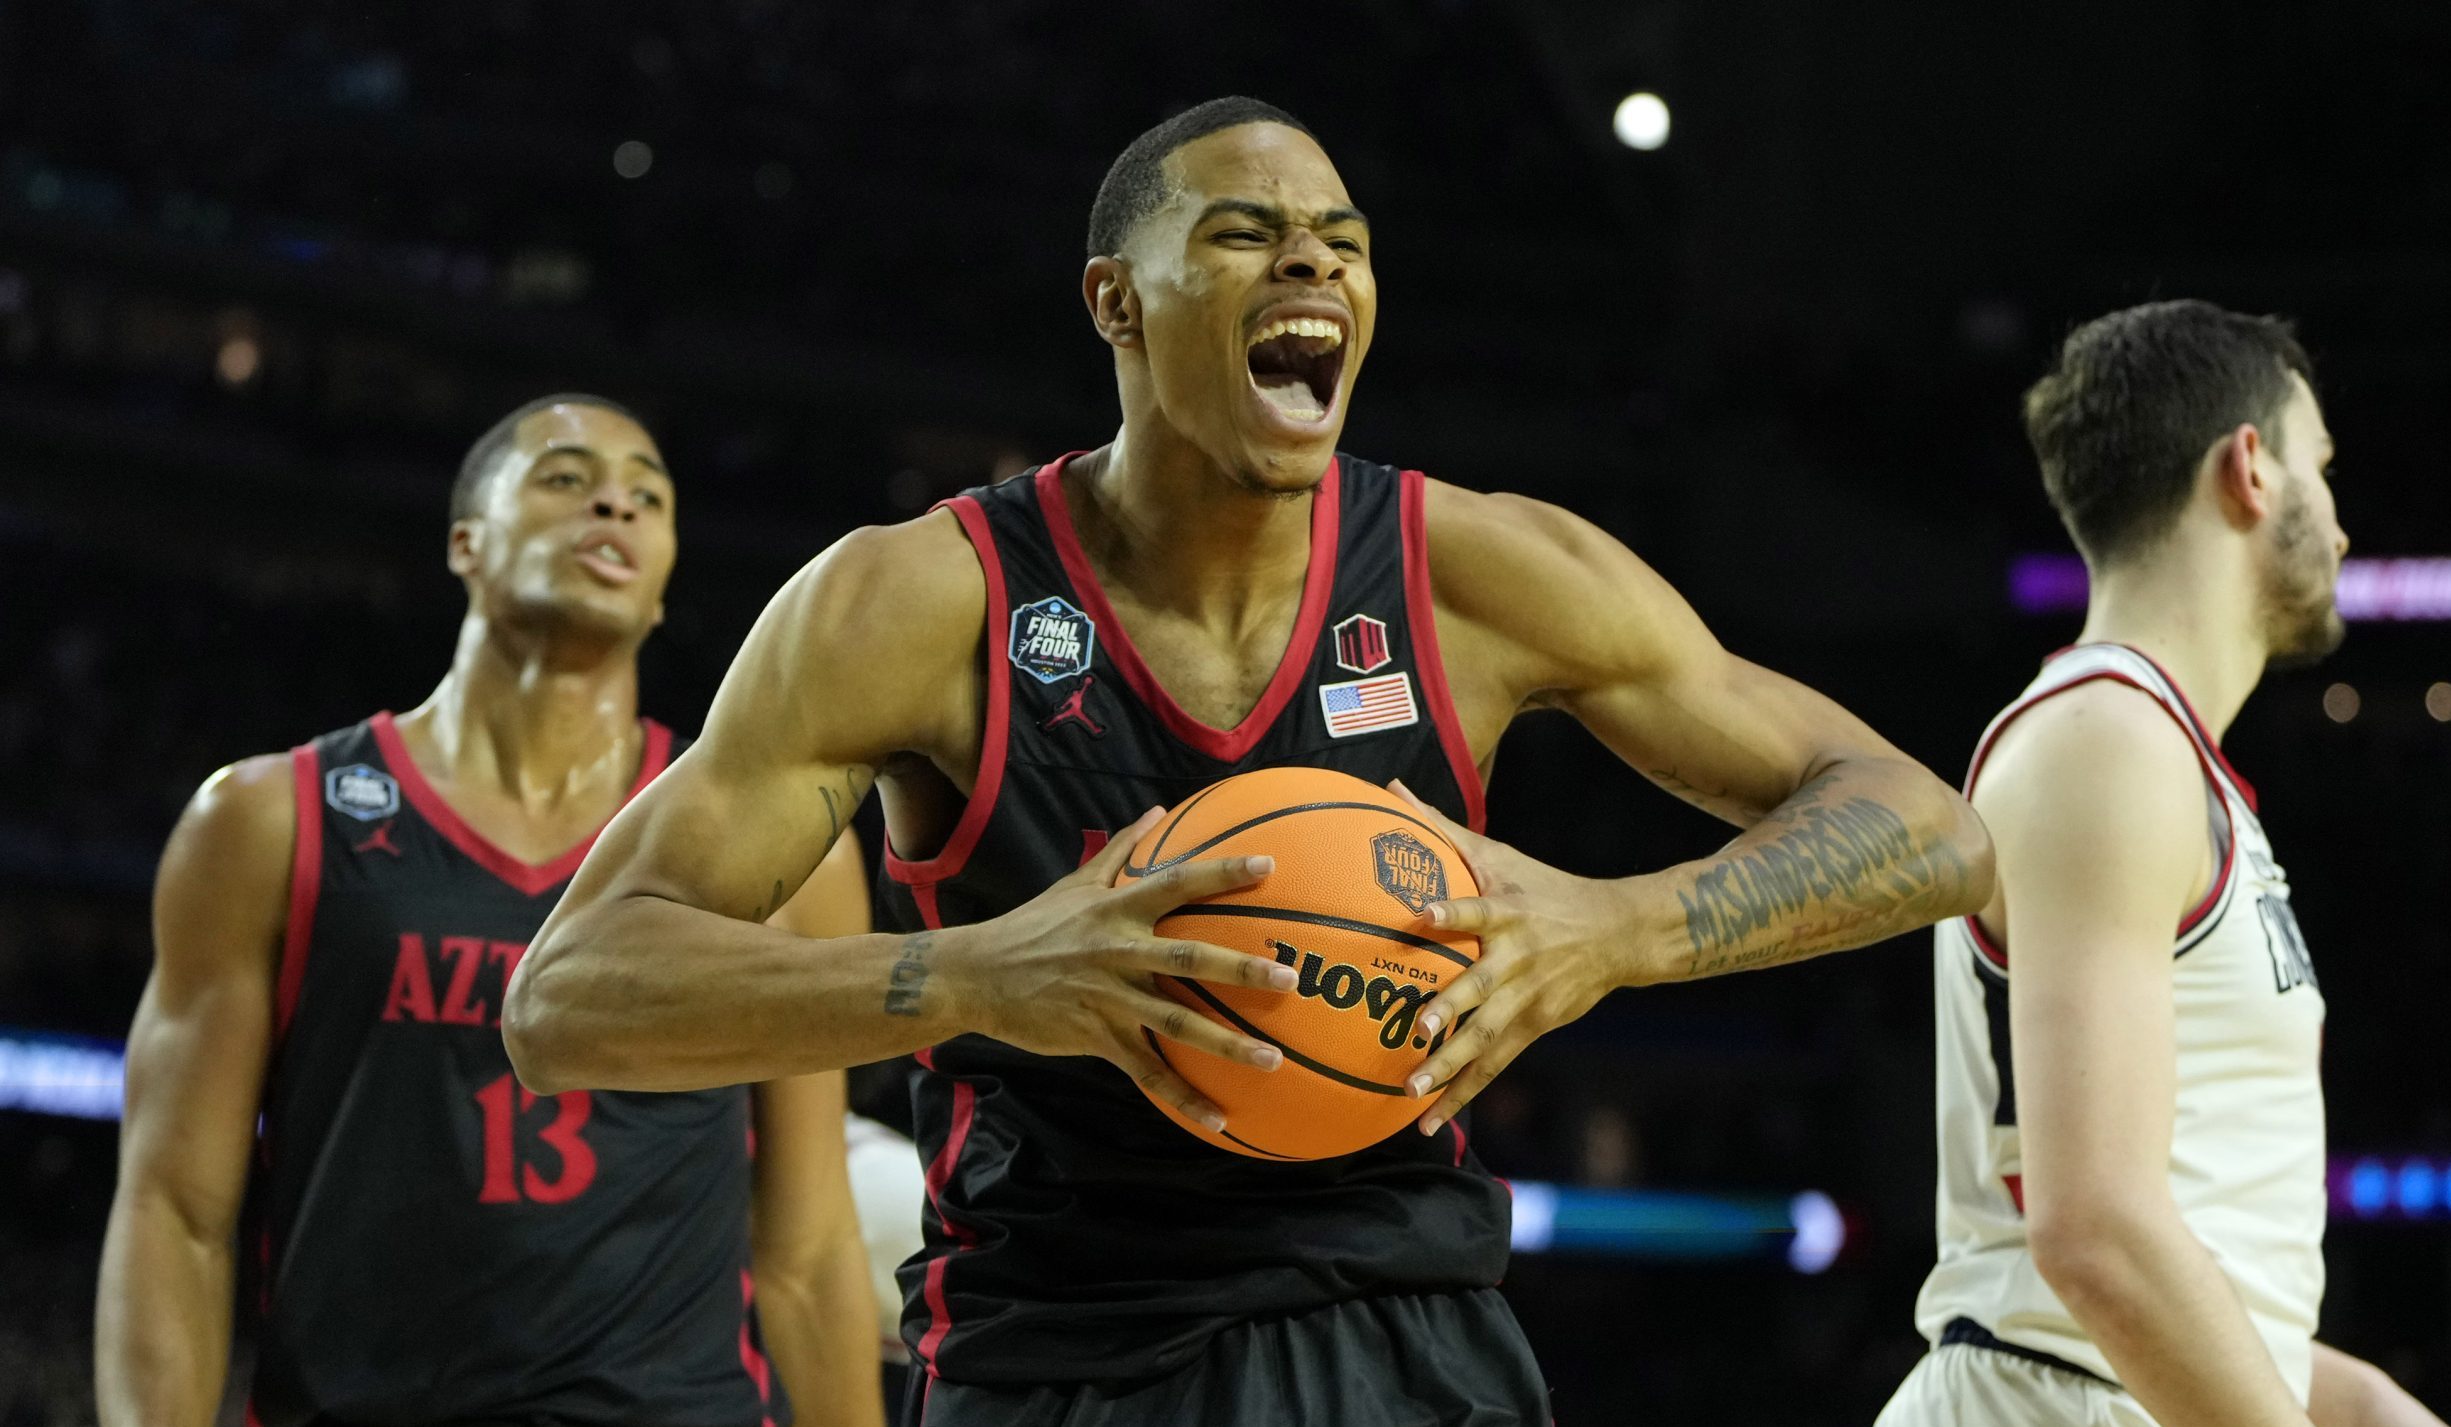 Keshad Johnson of San Diego State in the NCAA Tournament National Championship Game.